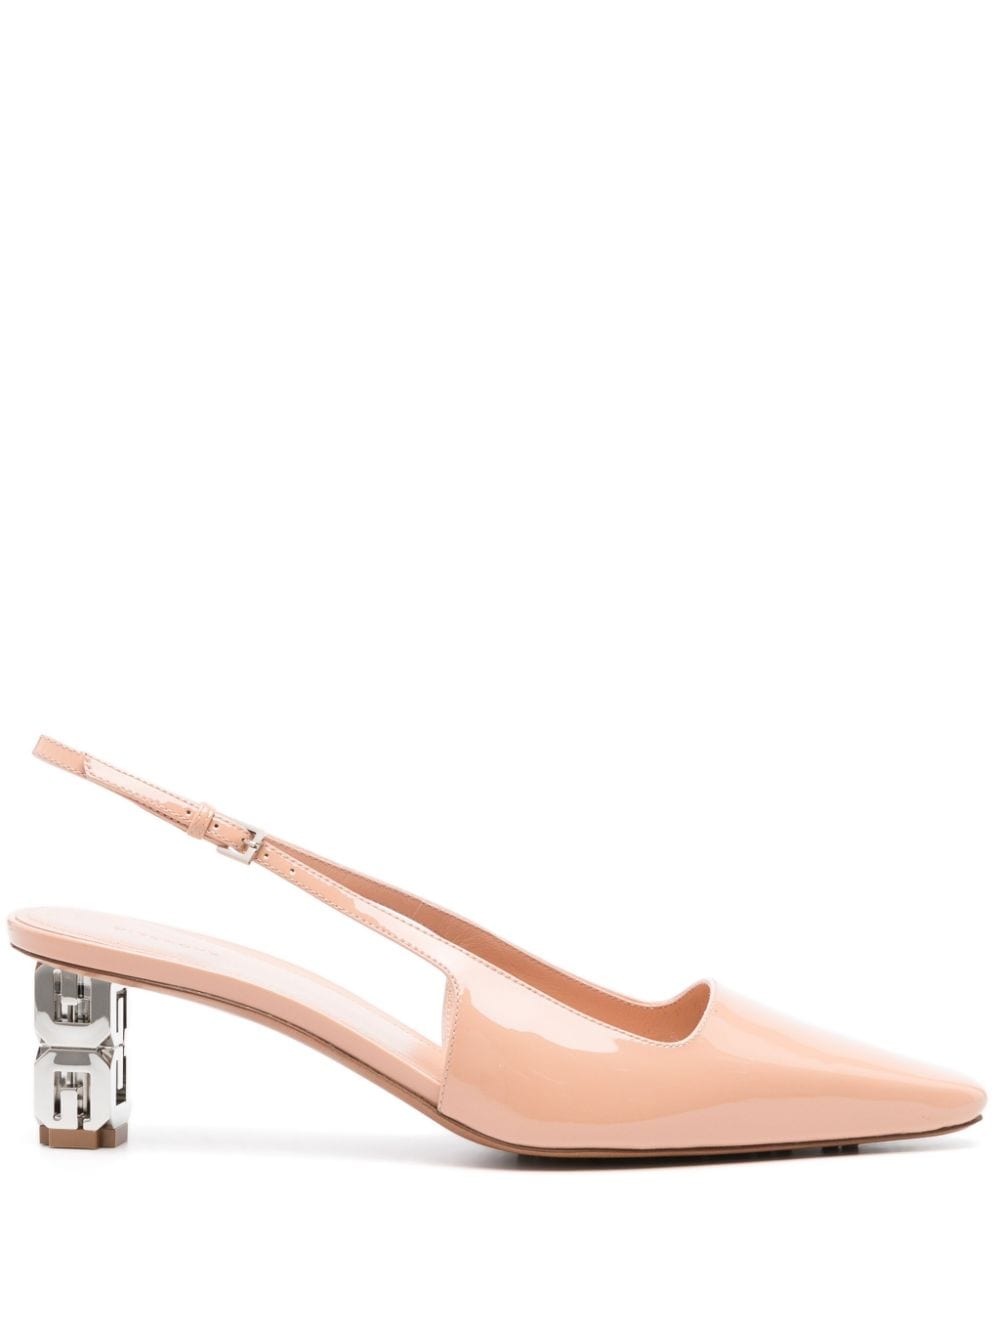 Givenchy G Cube 50mm pumps - Pink von Givenchy